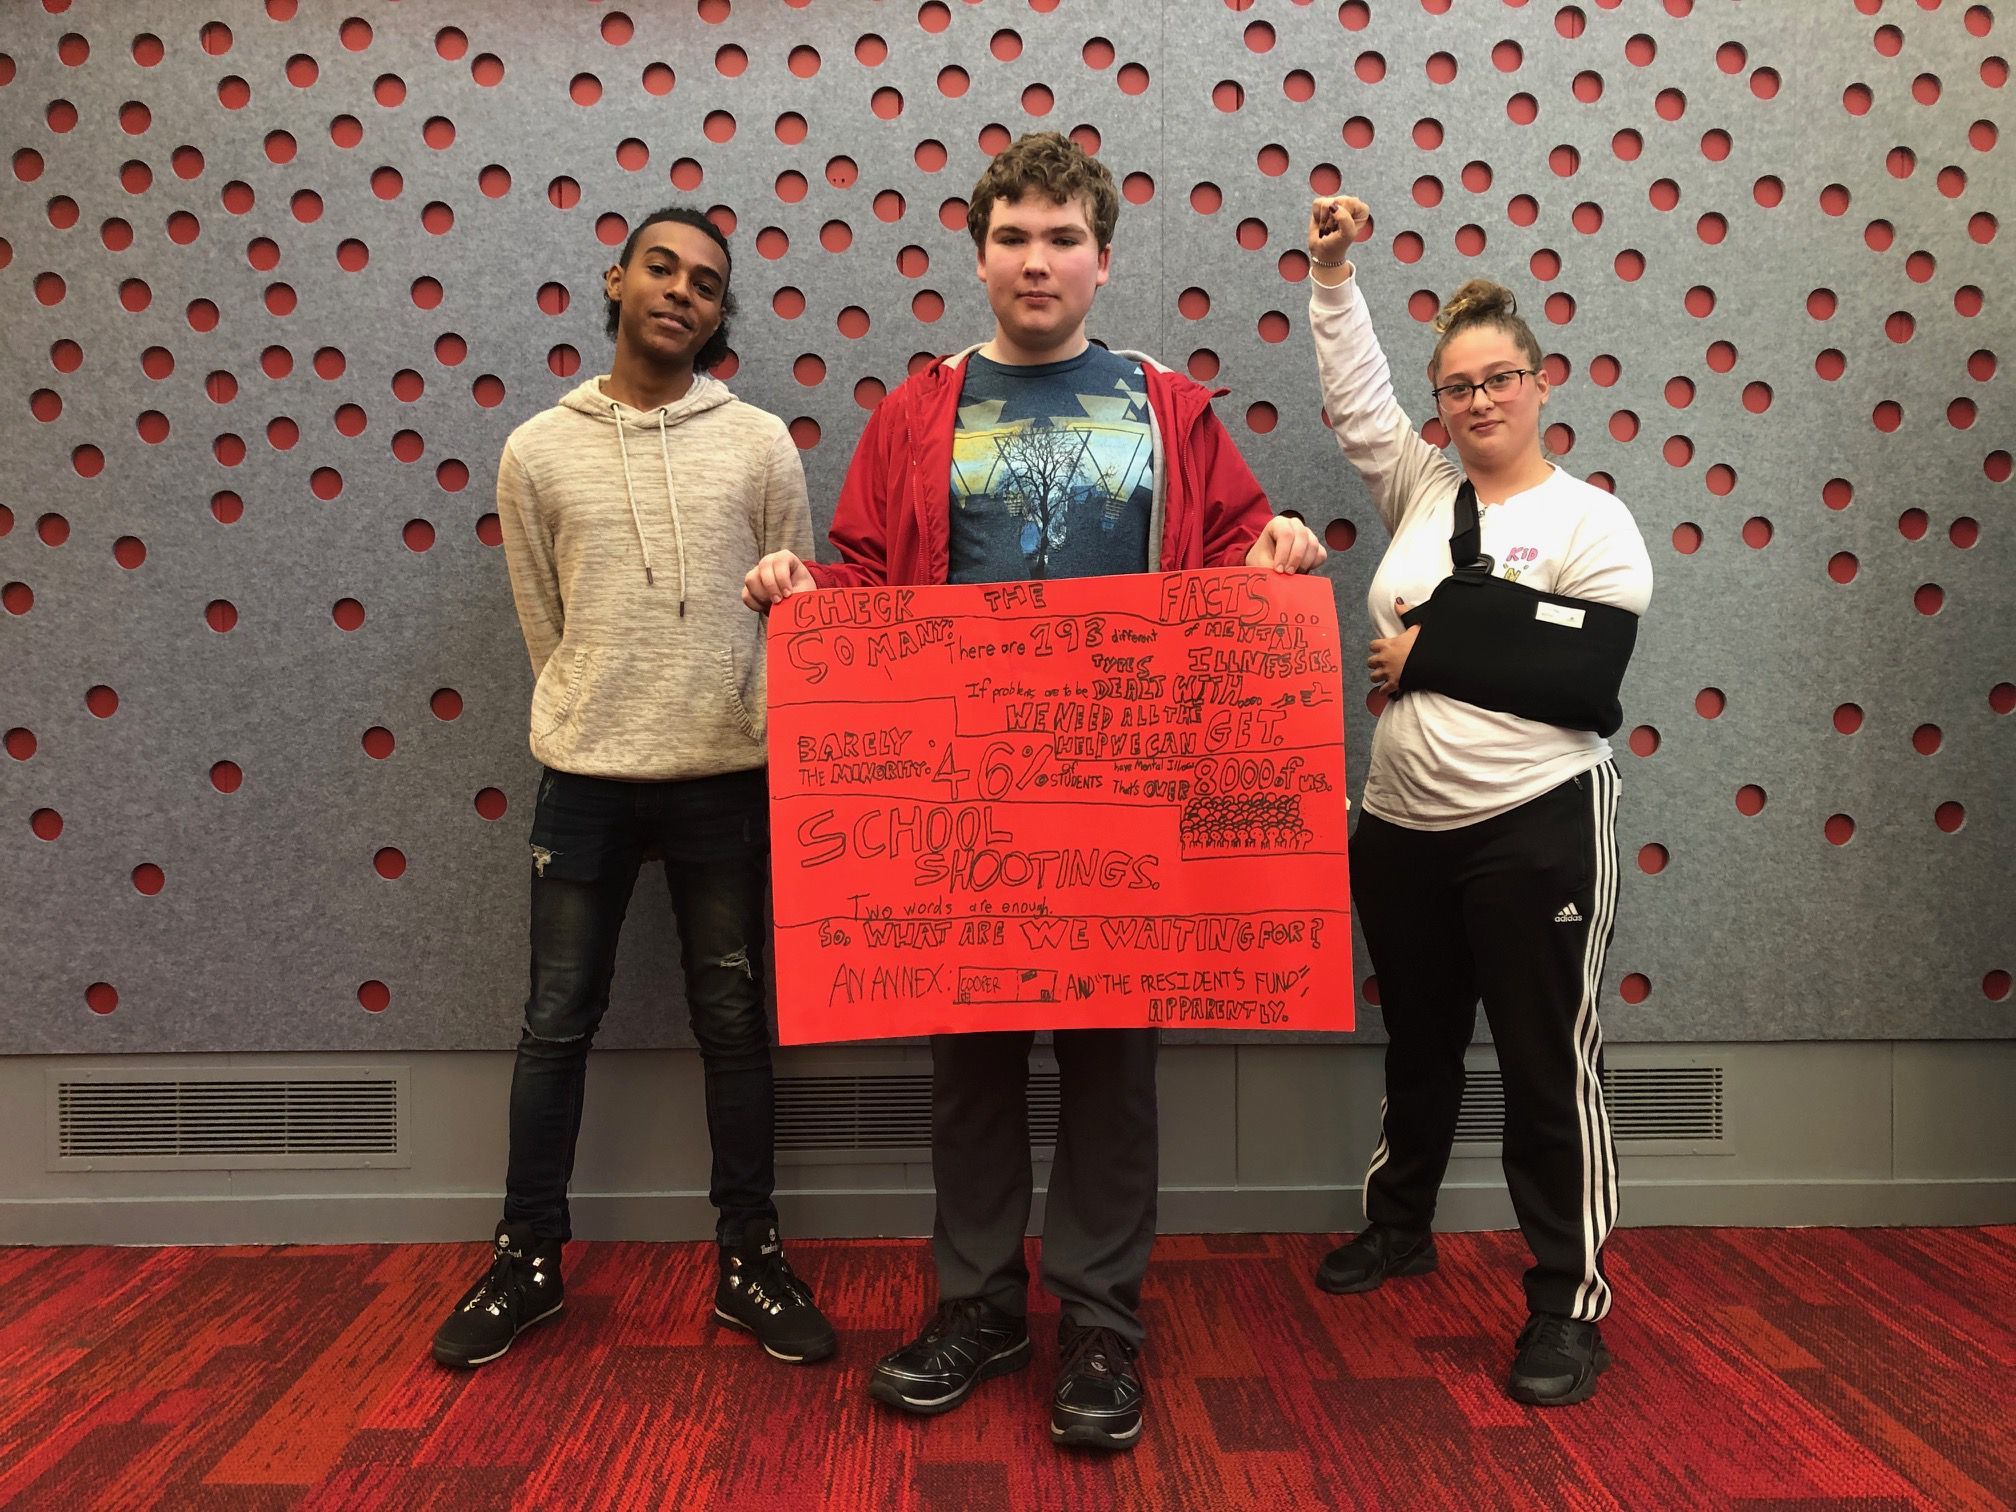 Students protest cuts to campus mental health resources